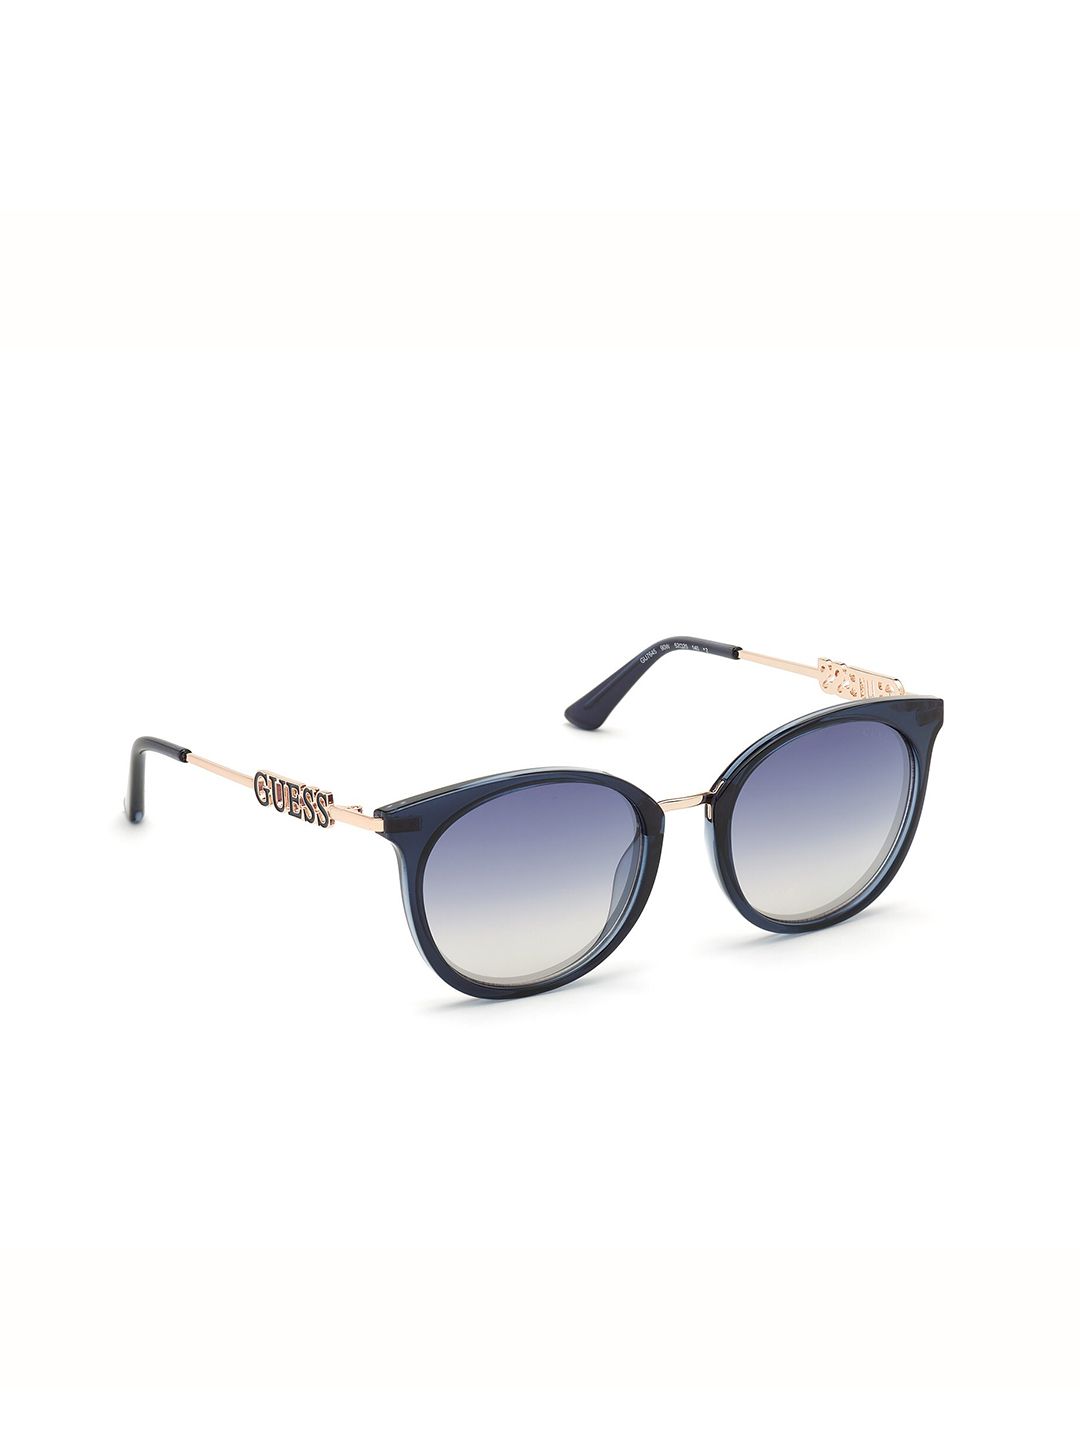 GUESS Women Blue Lens & Black Other Sunglasses with UV Protected Lens Price in India